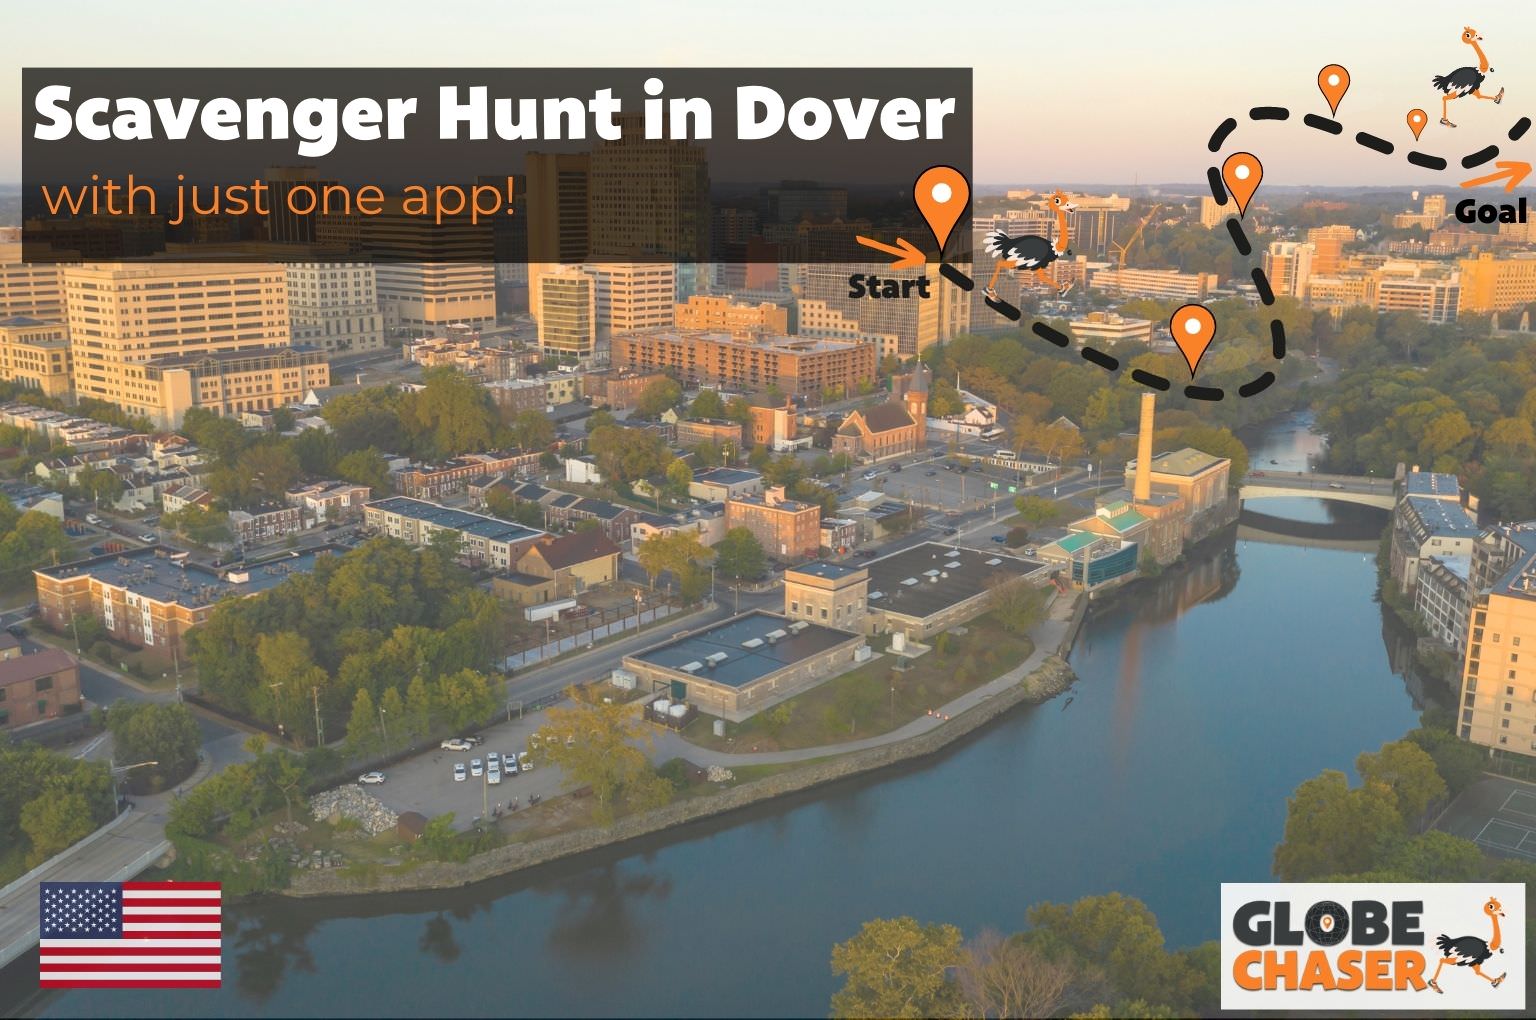 Scavenger Hunt in Dover, USA - Family Activities with the Globe Chaser App for Outdoor Fun